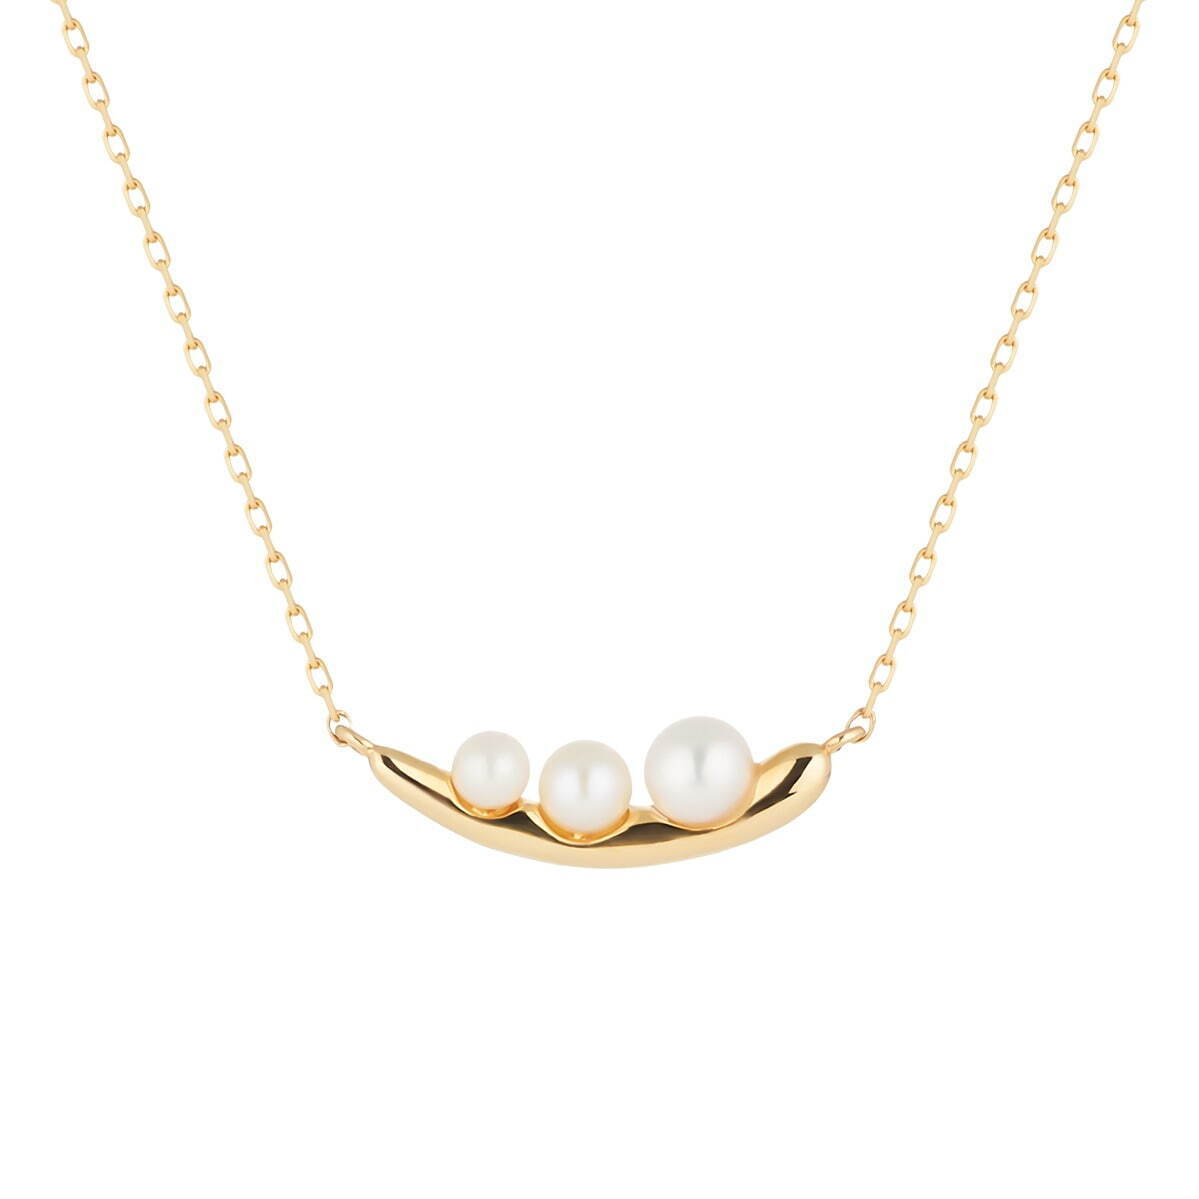 K10YG Necklace / Pearl 24,200円